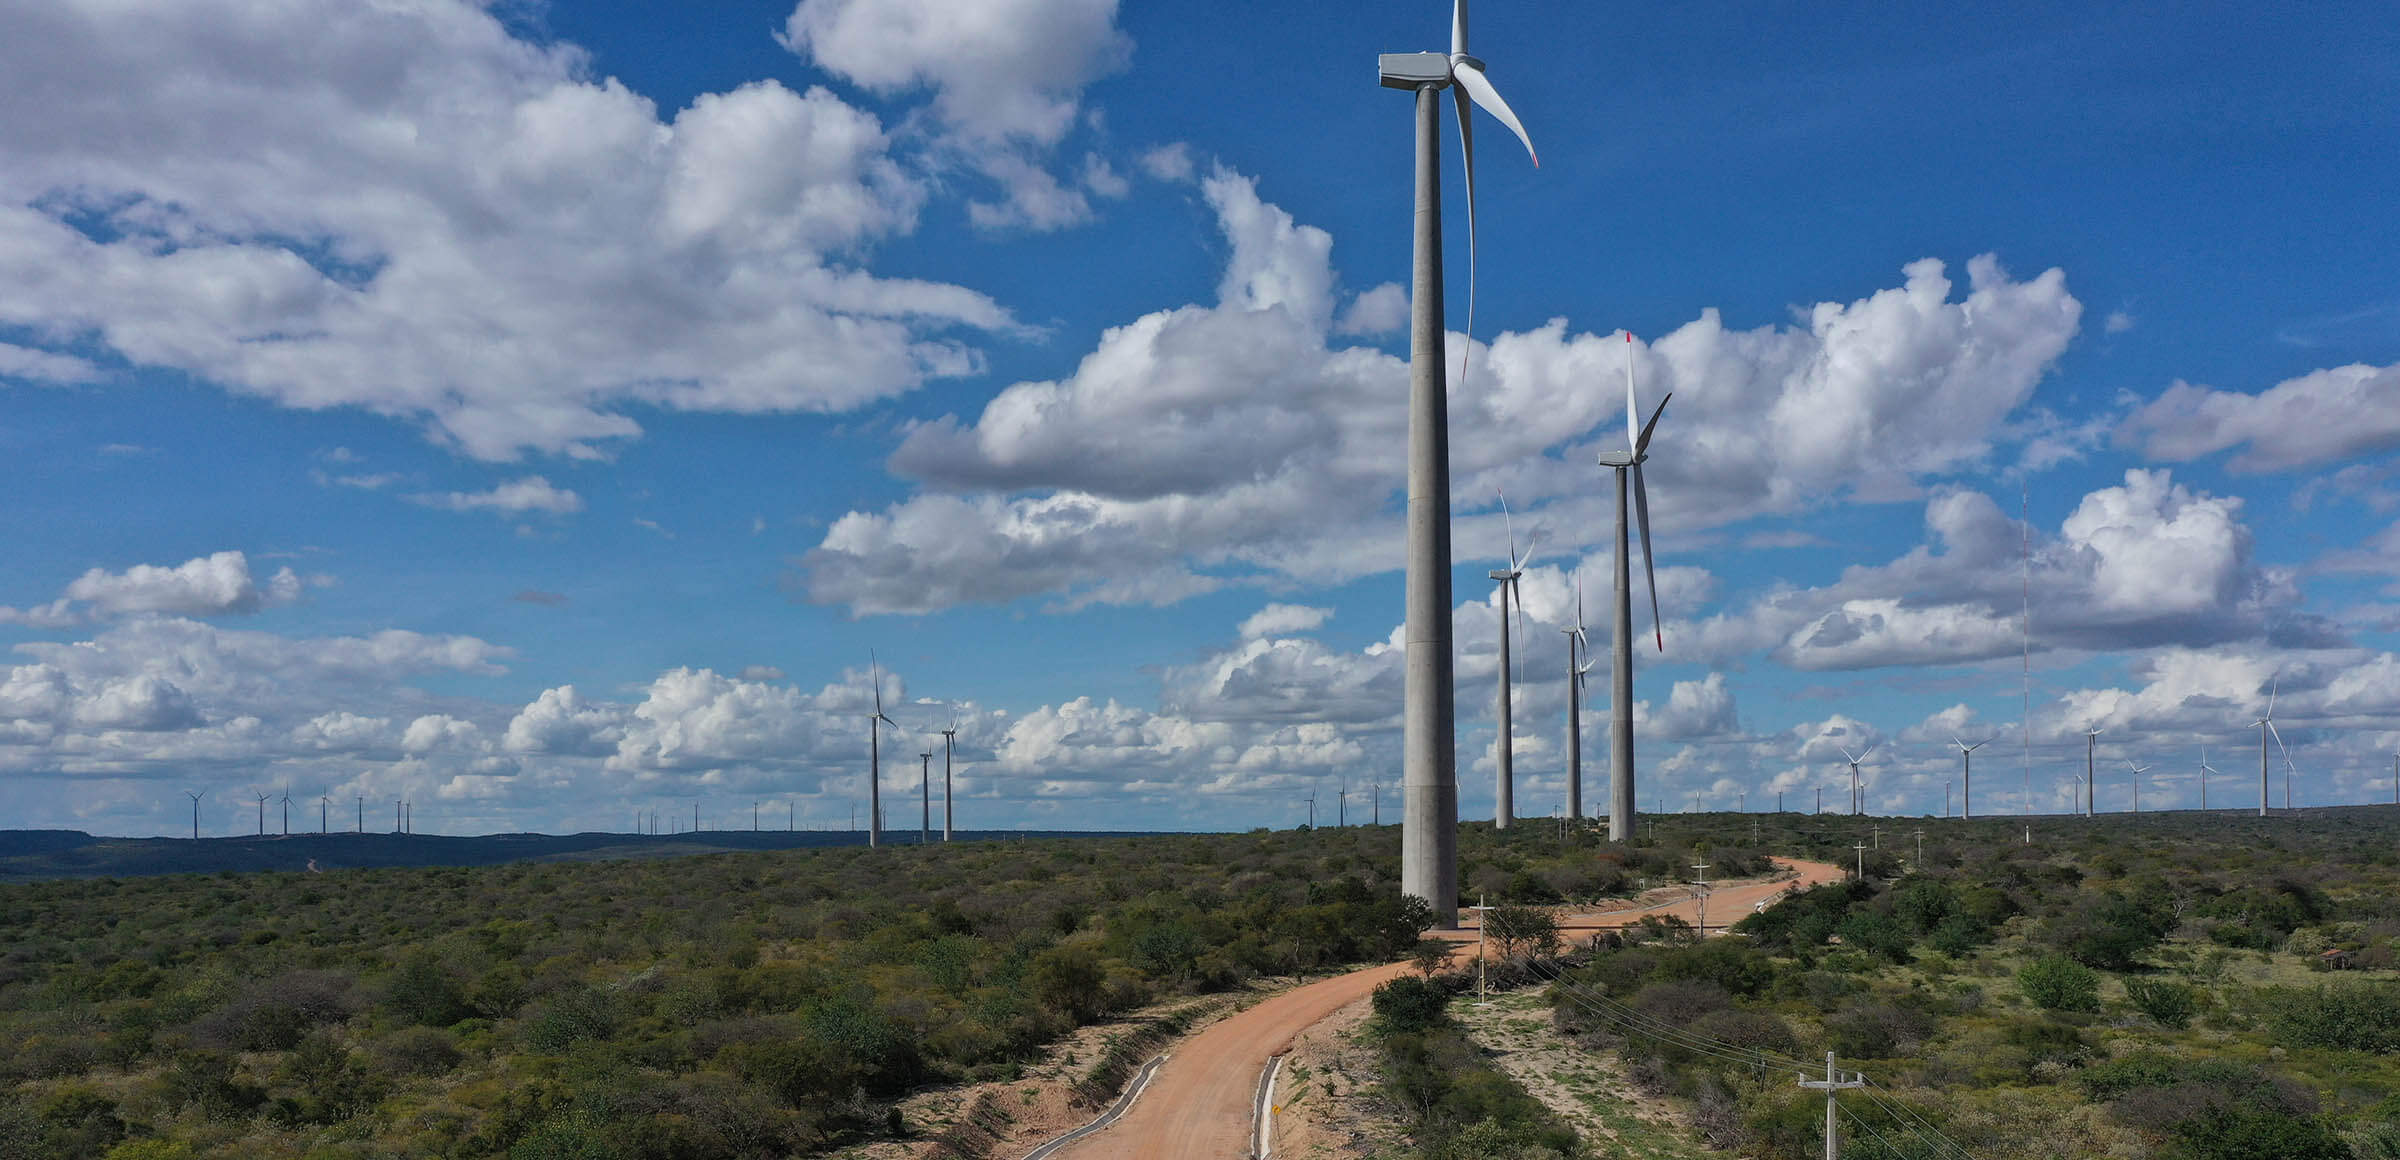 South America's largest wind farm starts producing electricity